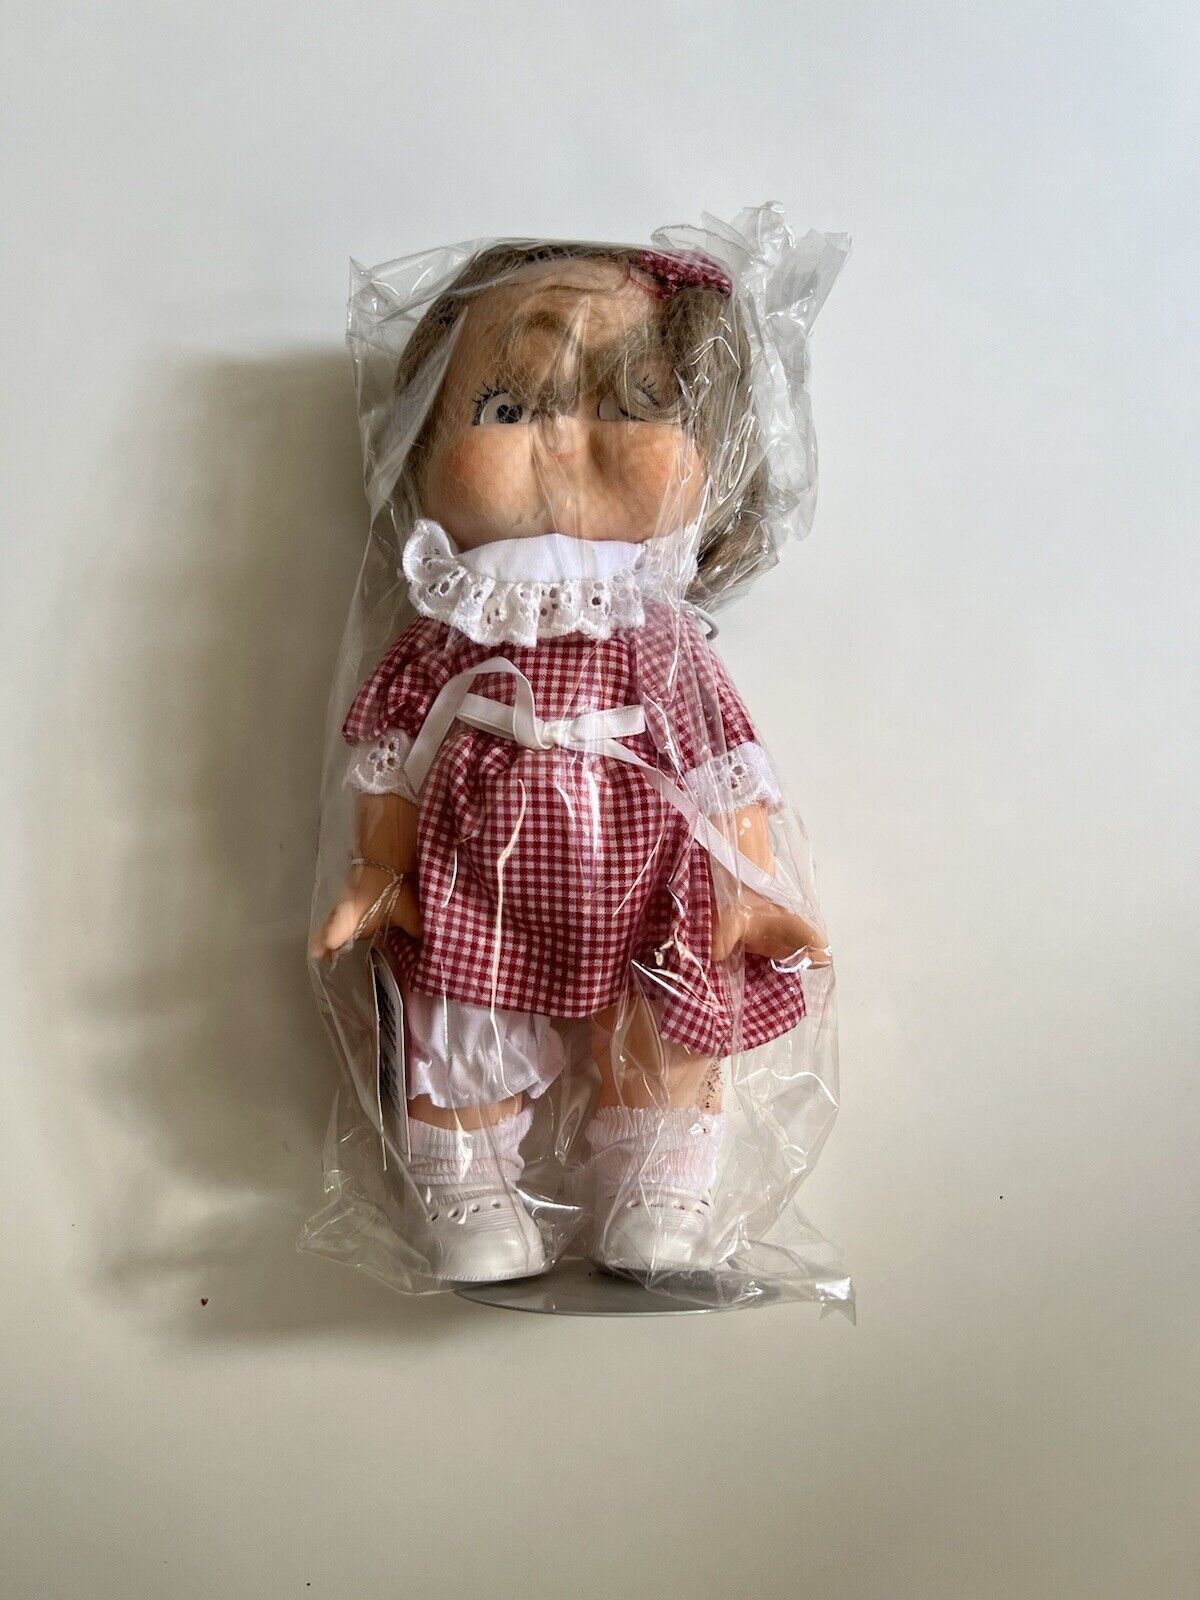 Vintage 1988 Campbell Soup Kid Doll Series Girl with Original Box